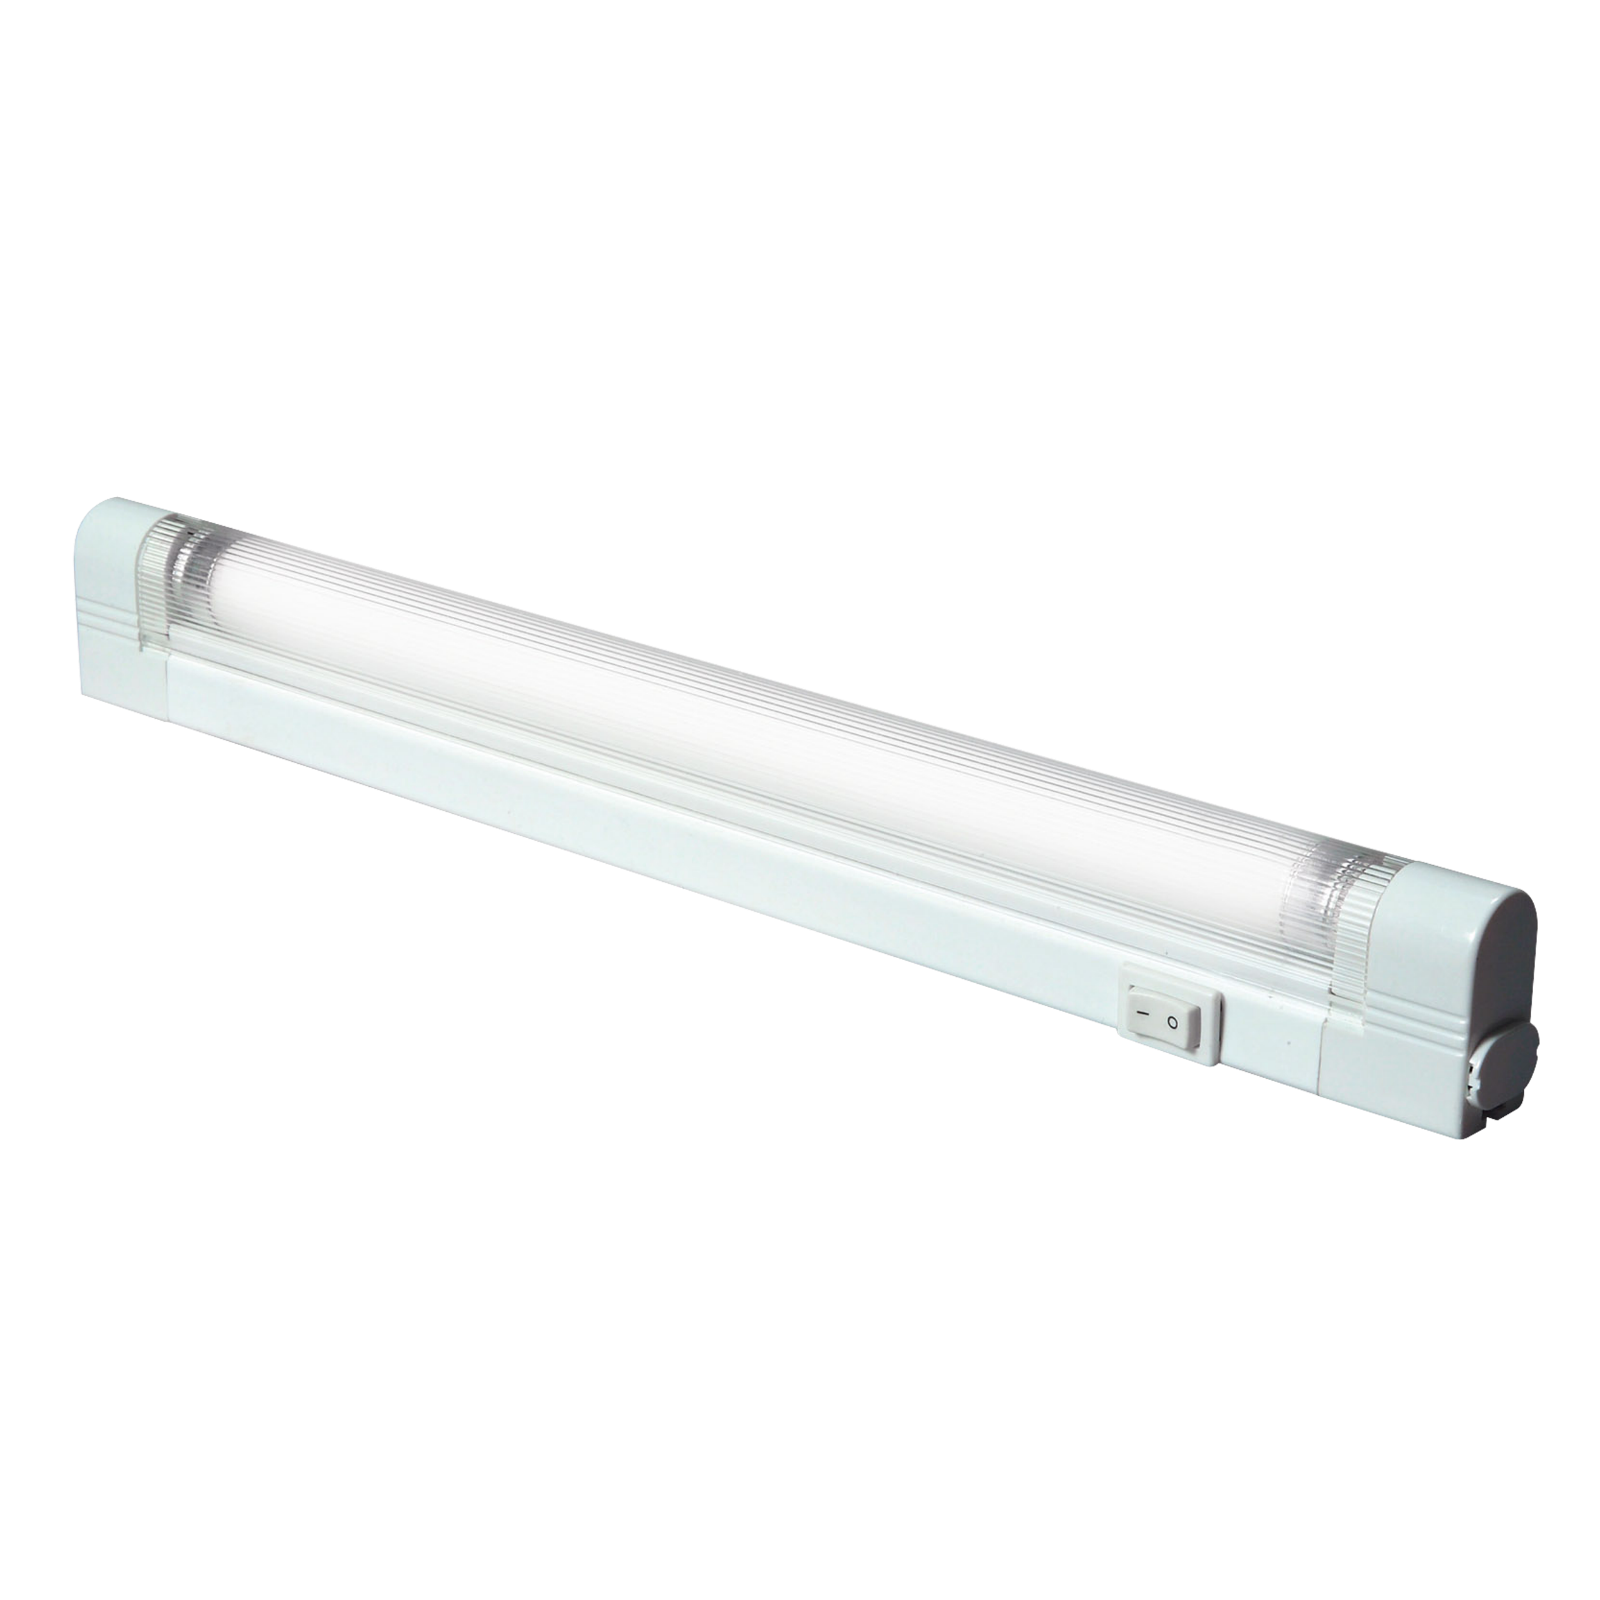 IP20 T5/G5 6W Slimline Linkable Fluorescent Fitting With Tube, Switch And Diffuser 3500K - T56 